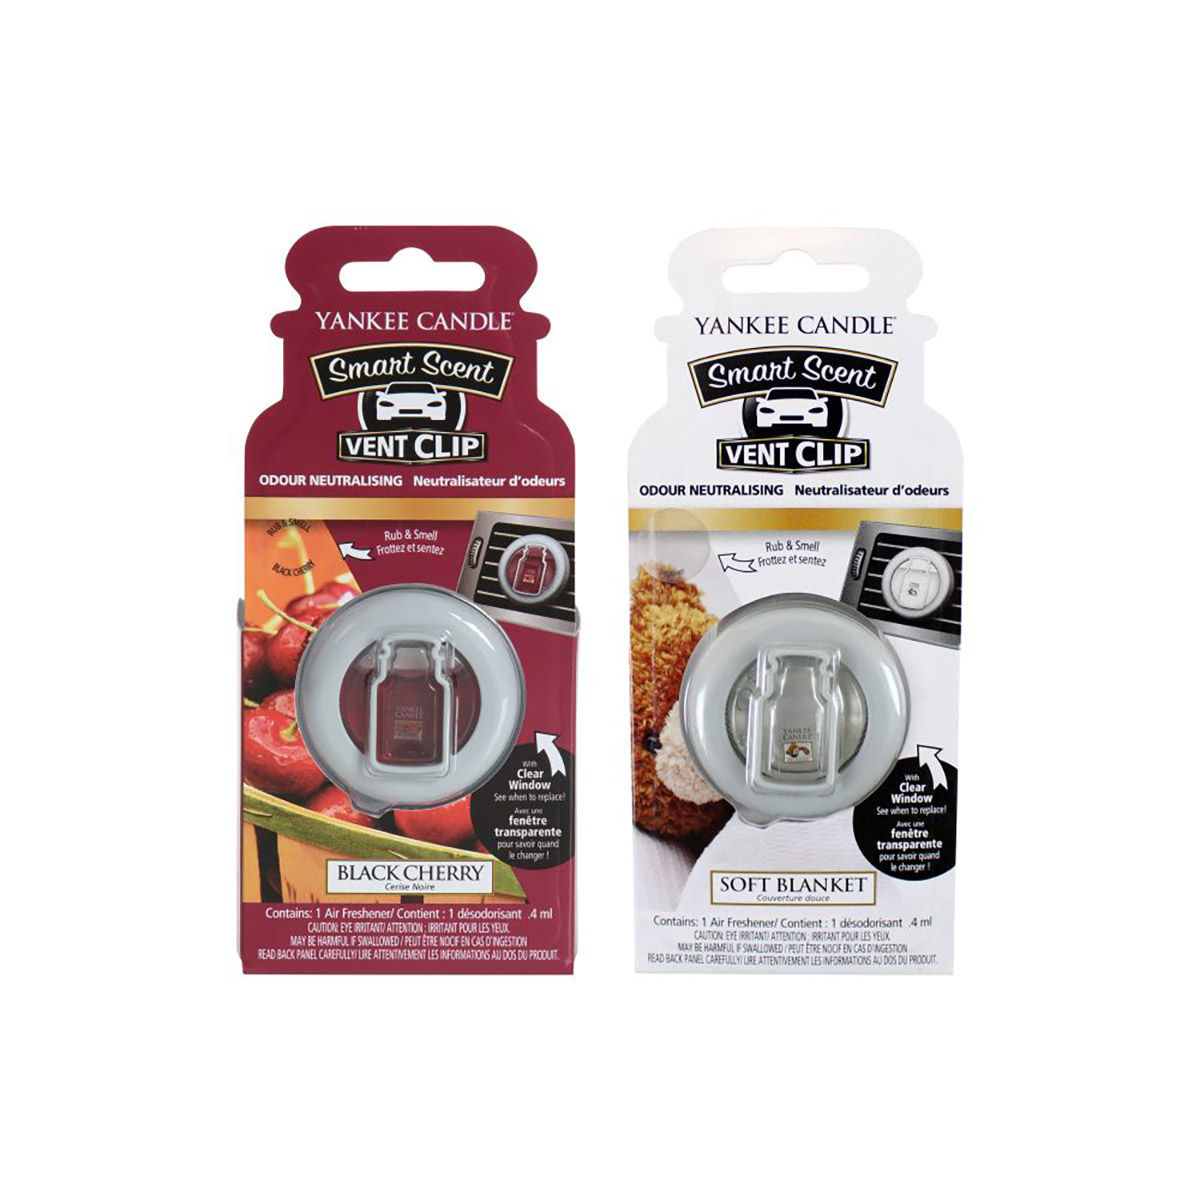 Yankee Candle Smart Scent Vent Clip Air Freshener - Pack of 2 - Black Cherry and Soft Blanket